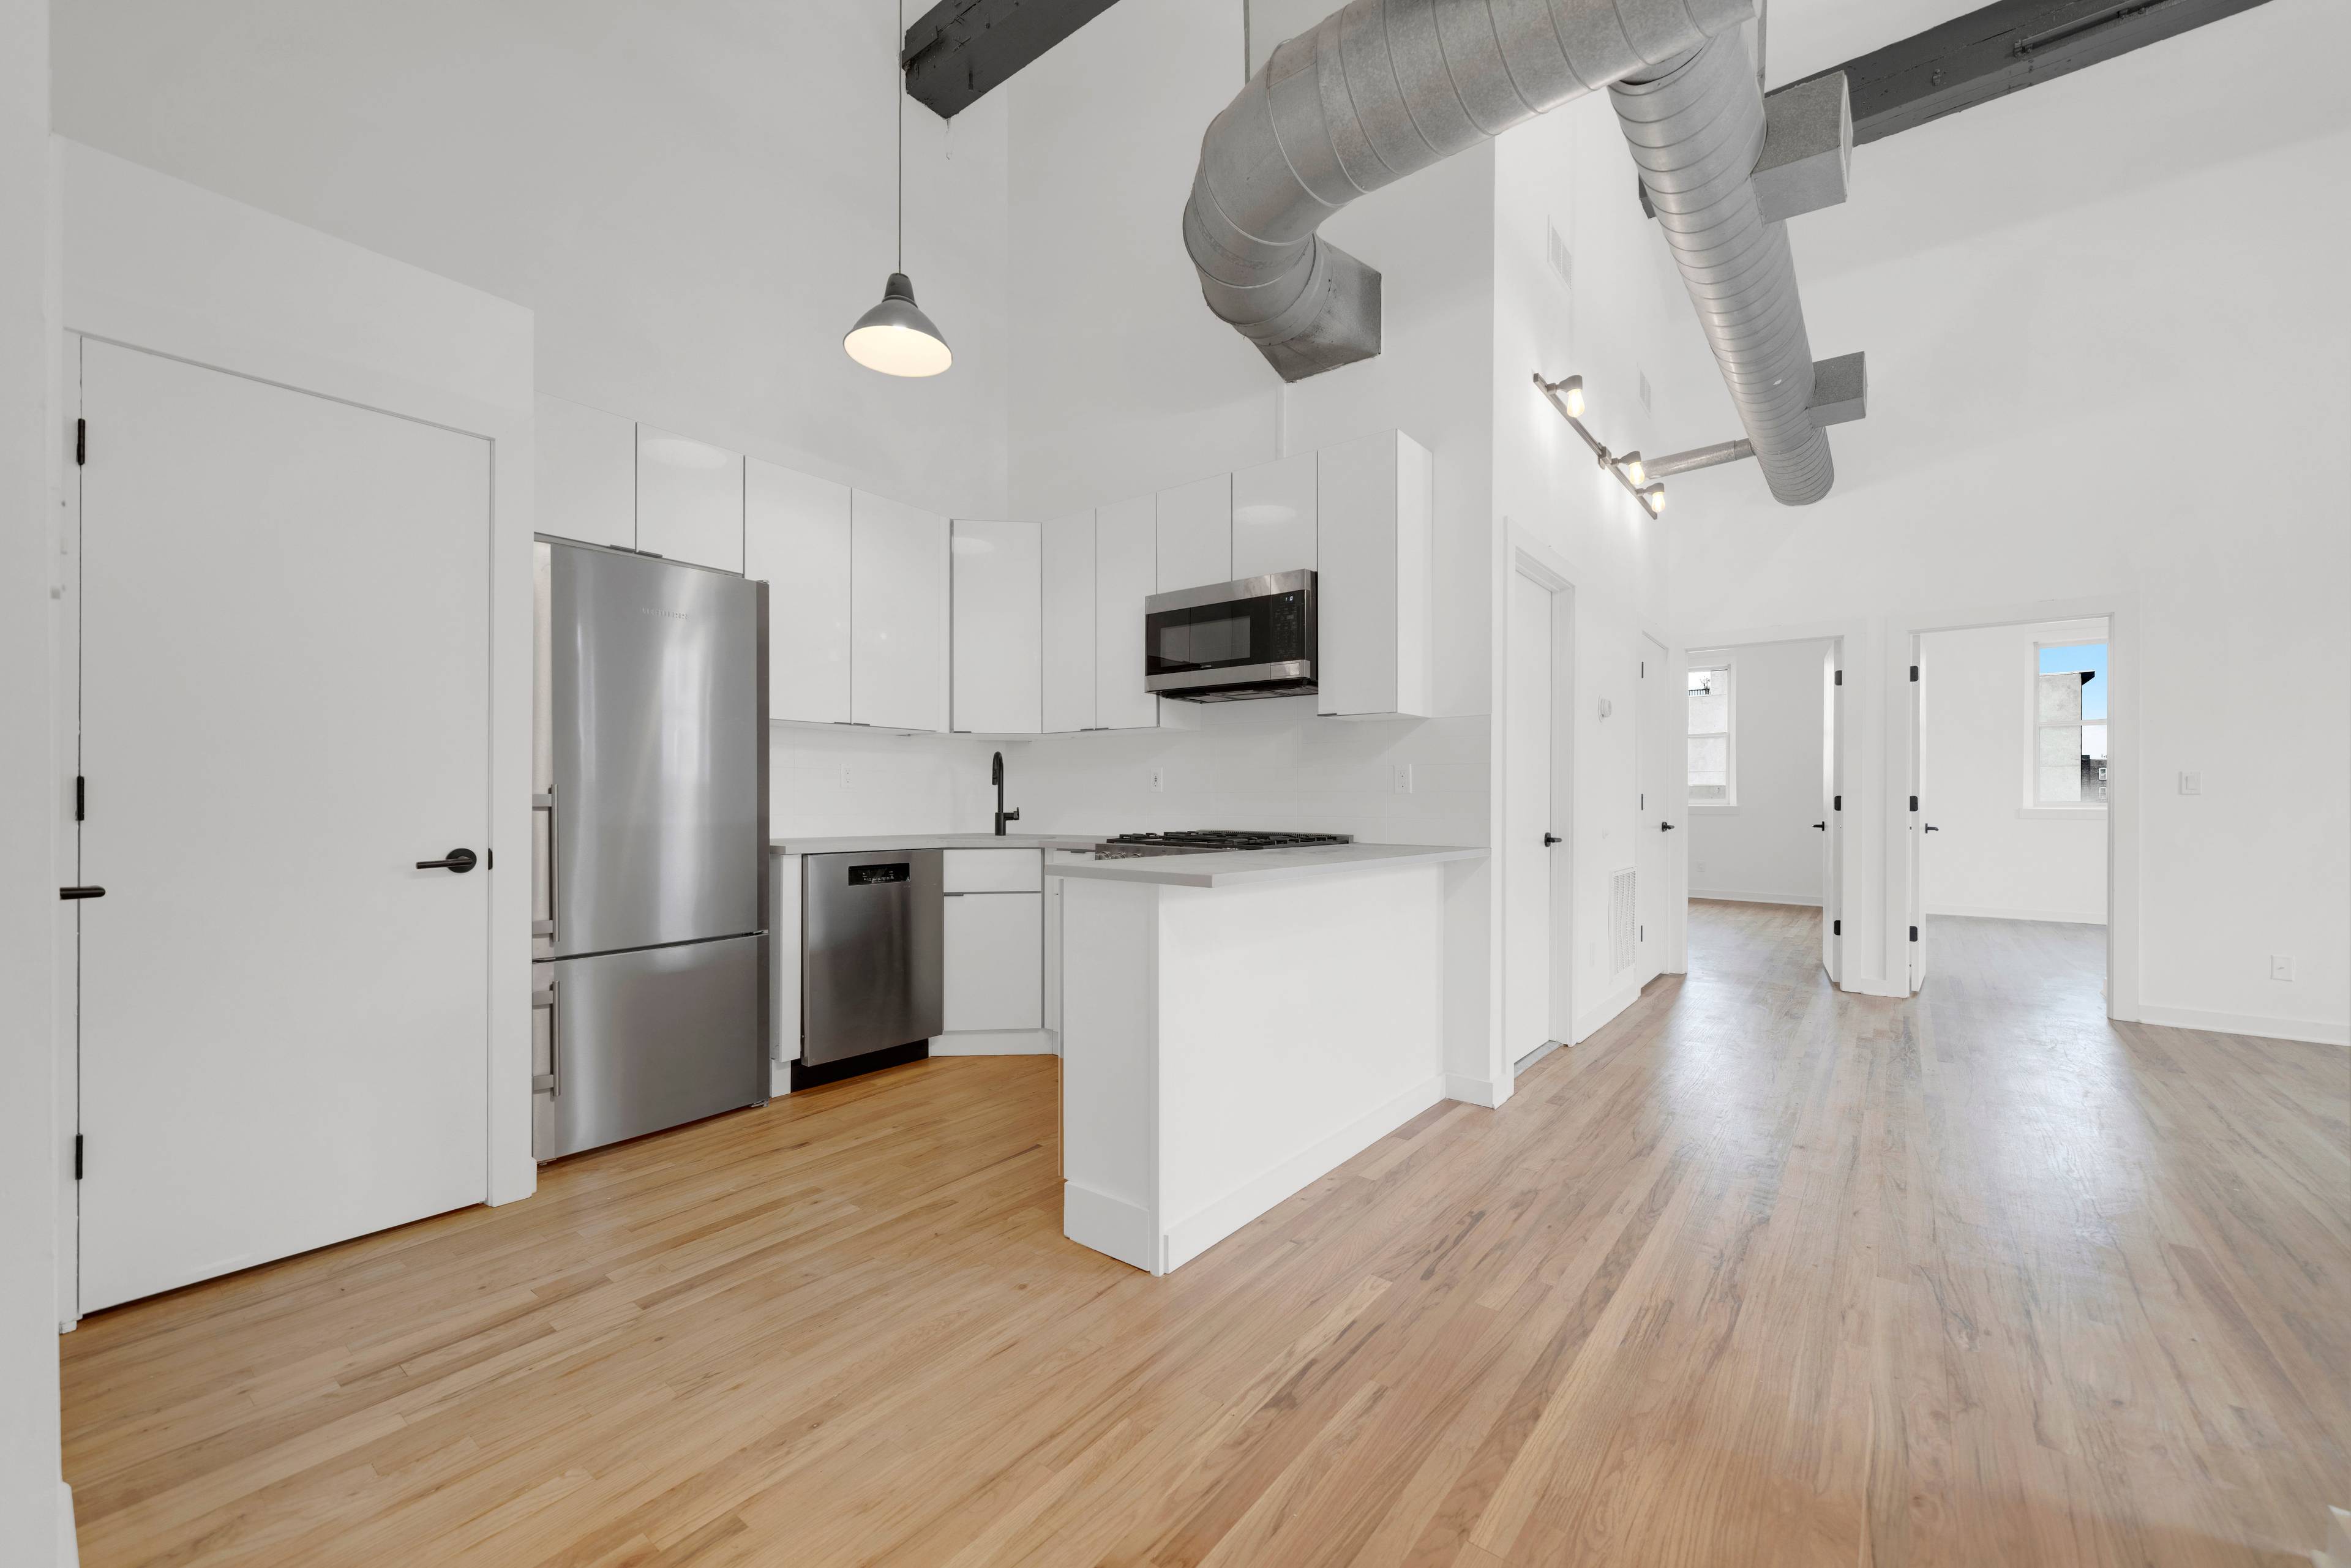 Open 3 Bedroom 2 Bathroom Loft Apartment located in Uptown Hoboken.  Laundry and Central AC In Unit!  Pets Welcome!